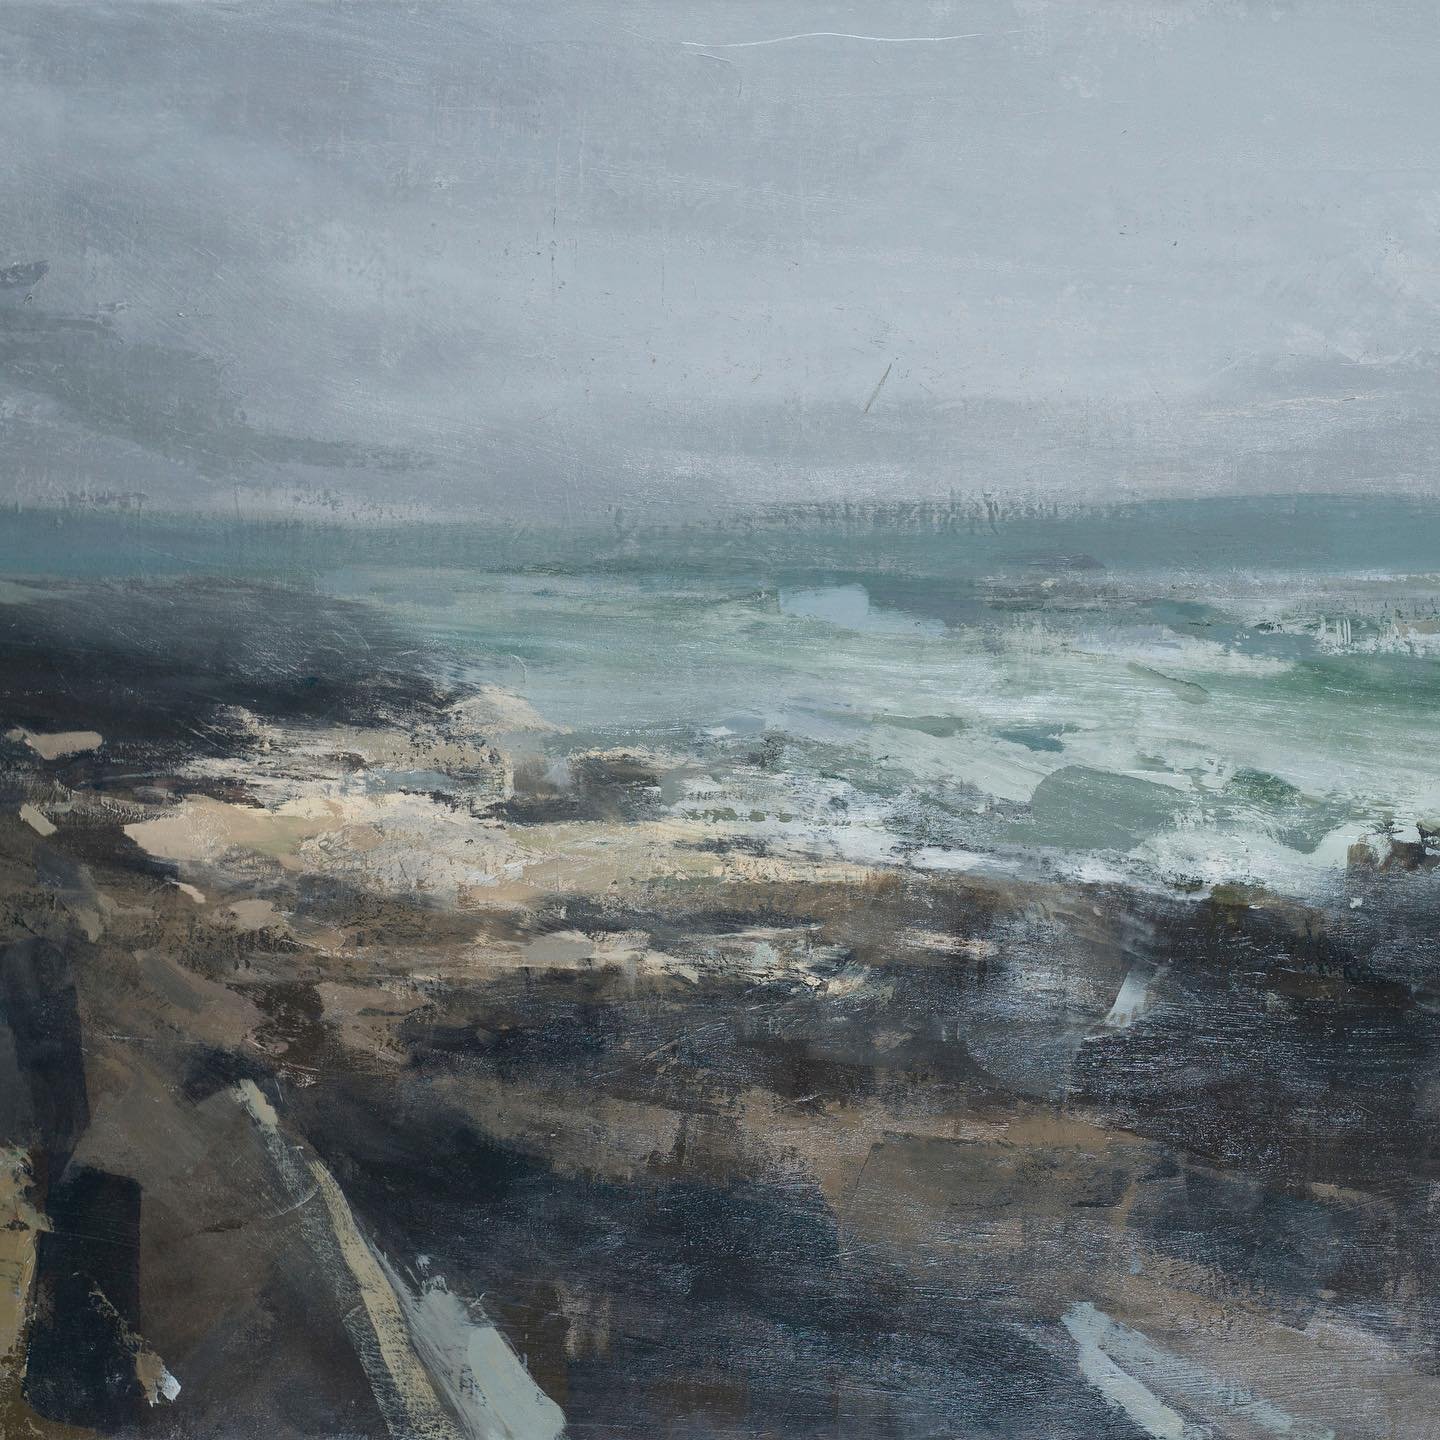 New work from Timothy Powers Wilson arriving today and opening tomorrow in the gallery and online! Here&rsquo;s a detail of &lsquo;Dyers Cove&rsquo;.

#dyerscove #ocean #timothypowerswilson